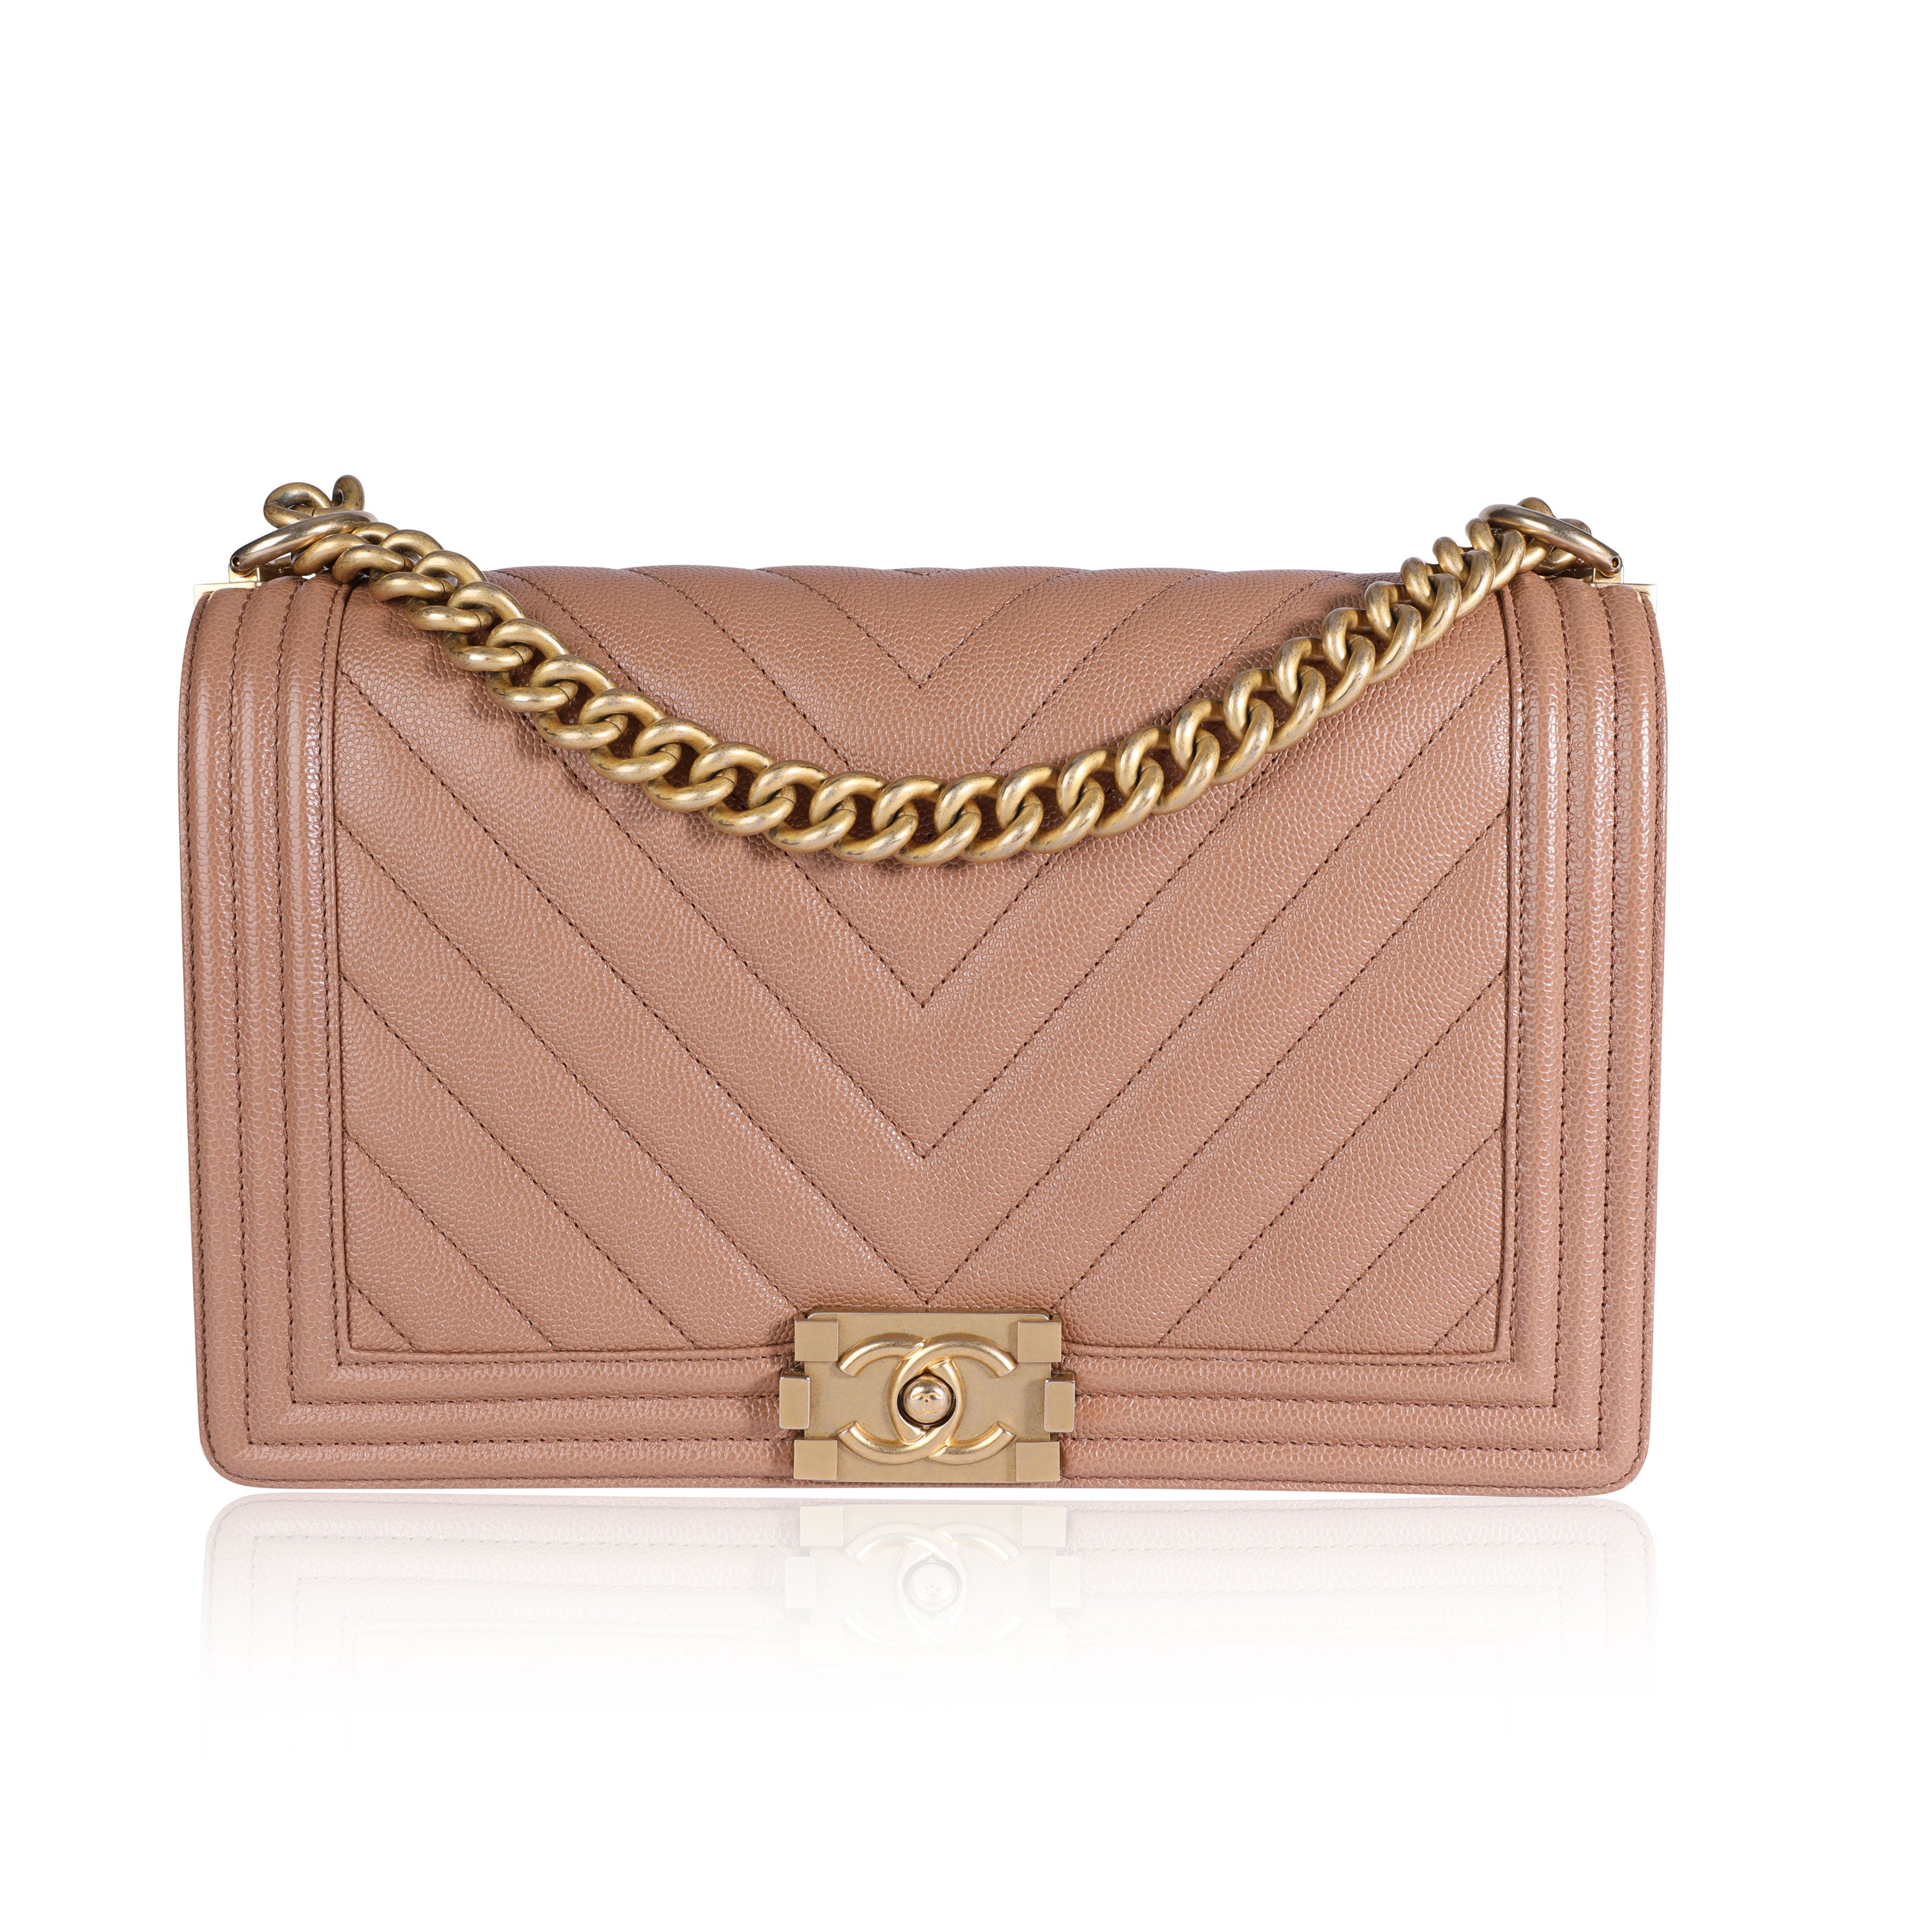 Chanel-Large-Quilted-Boy-Bag-1 - Dash of Darling